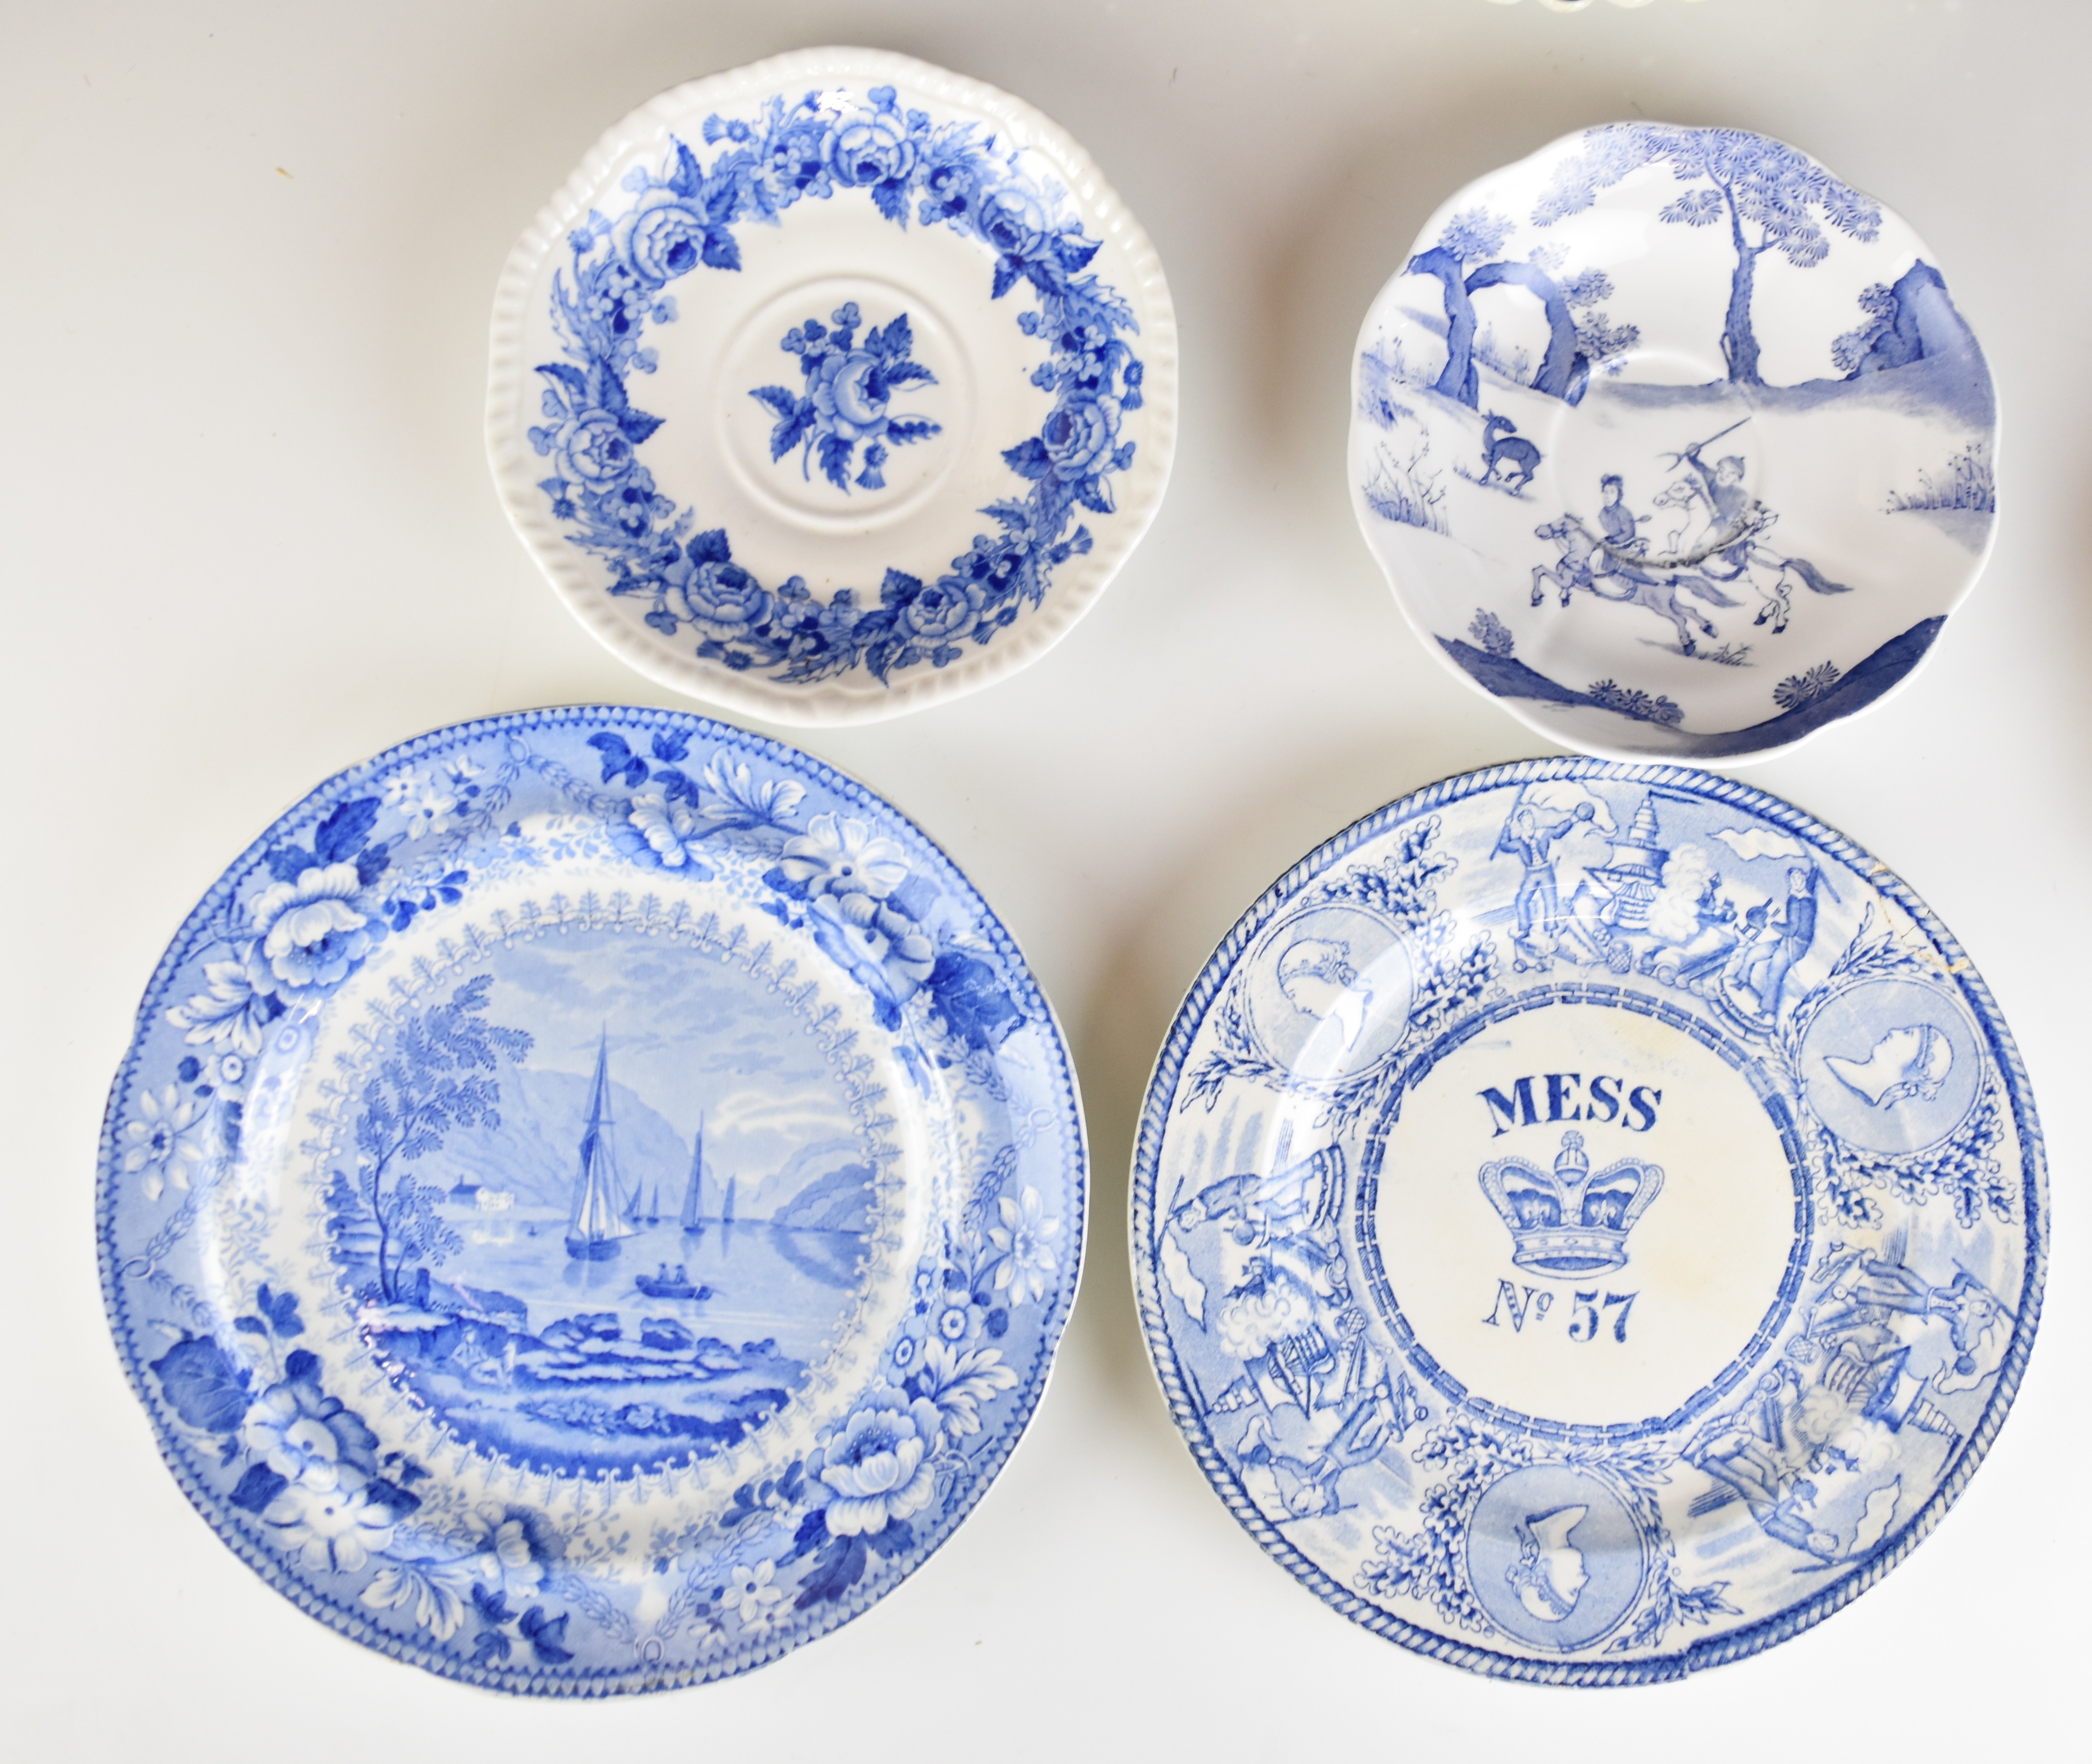 19thC blue and white English and Chinese porcelain / ceramics including Chinese export dish, - Image 8 of 10